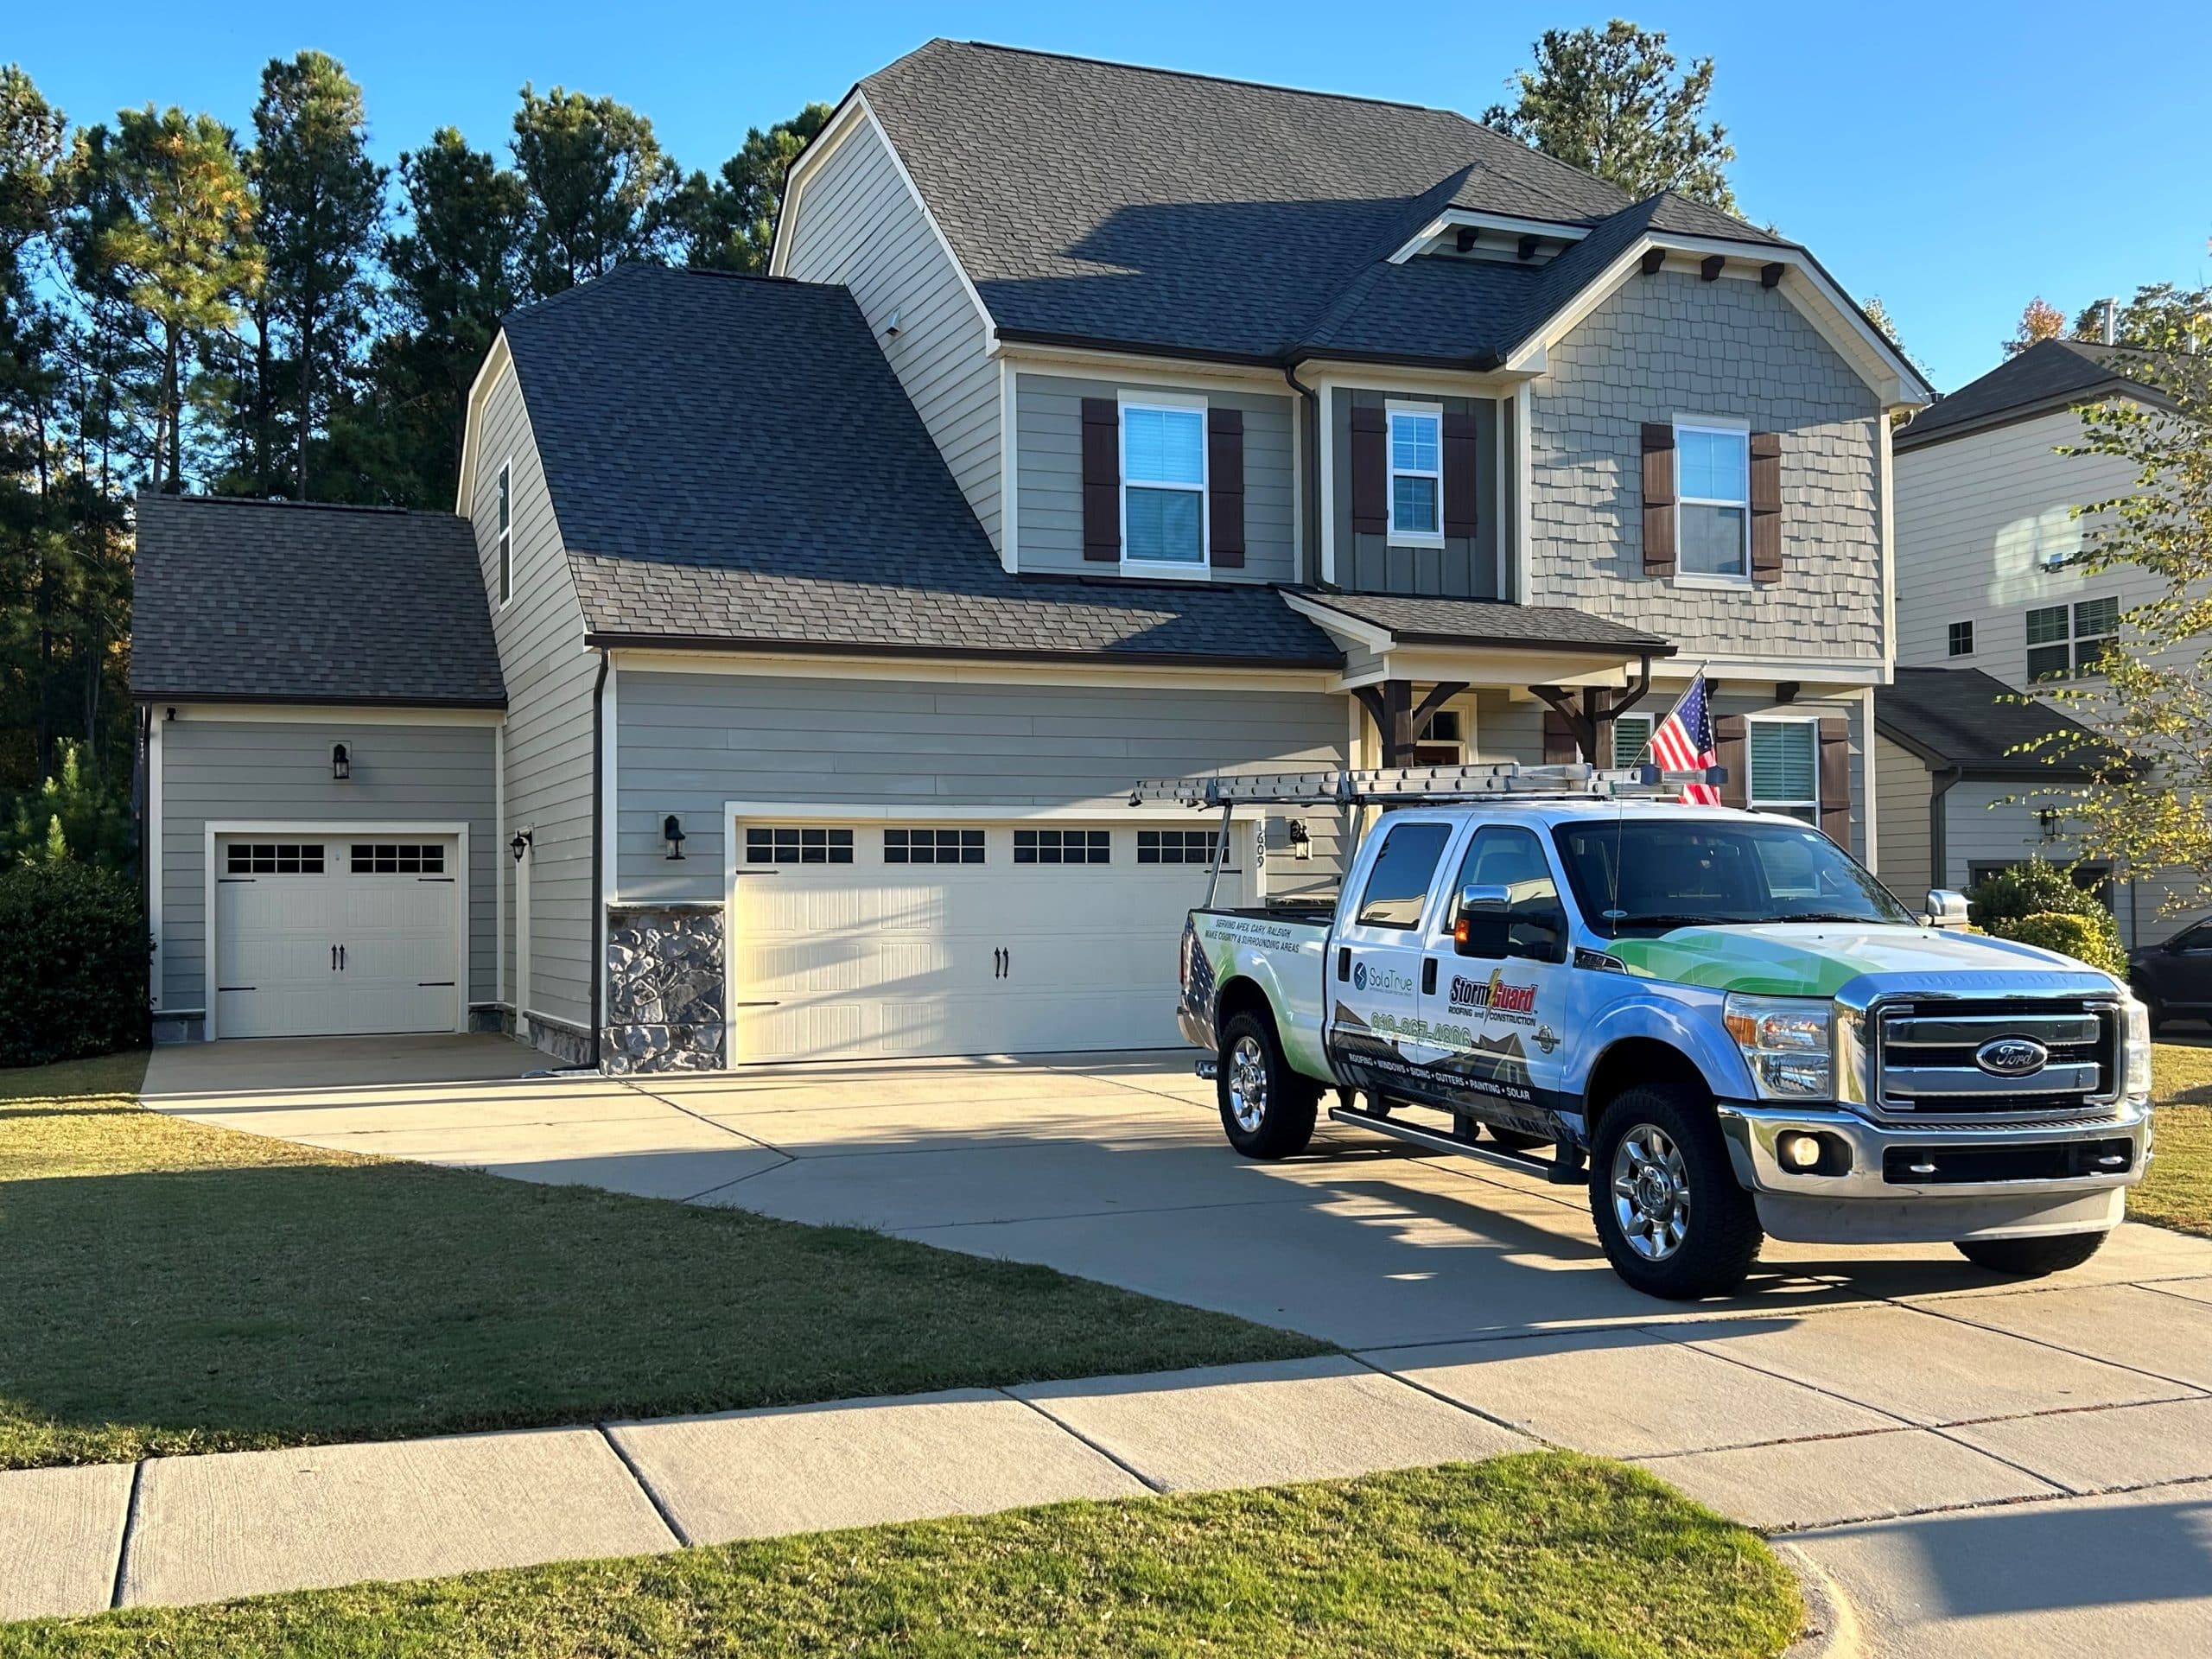 Brick House with Storm Guard Restoration Services Truck In Driveway -Apex Cary